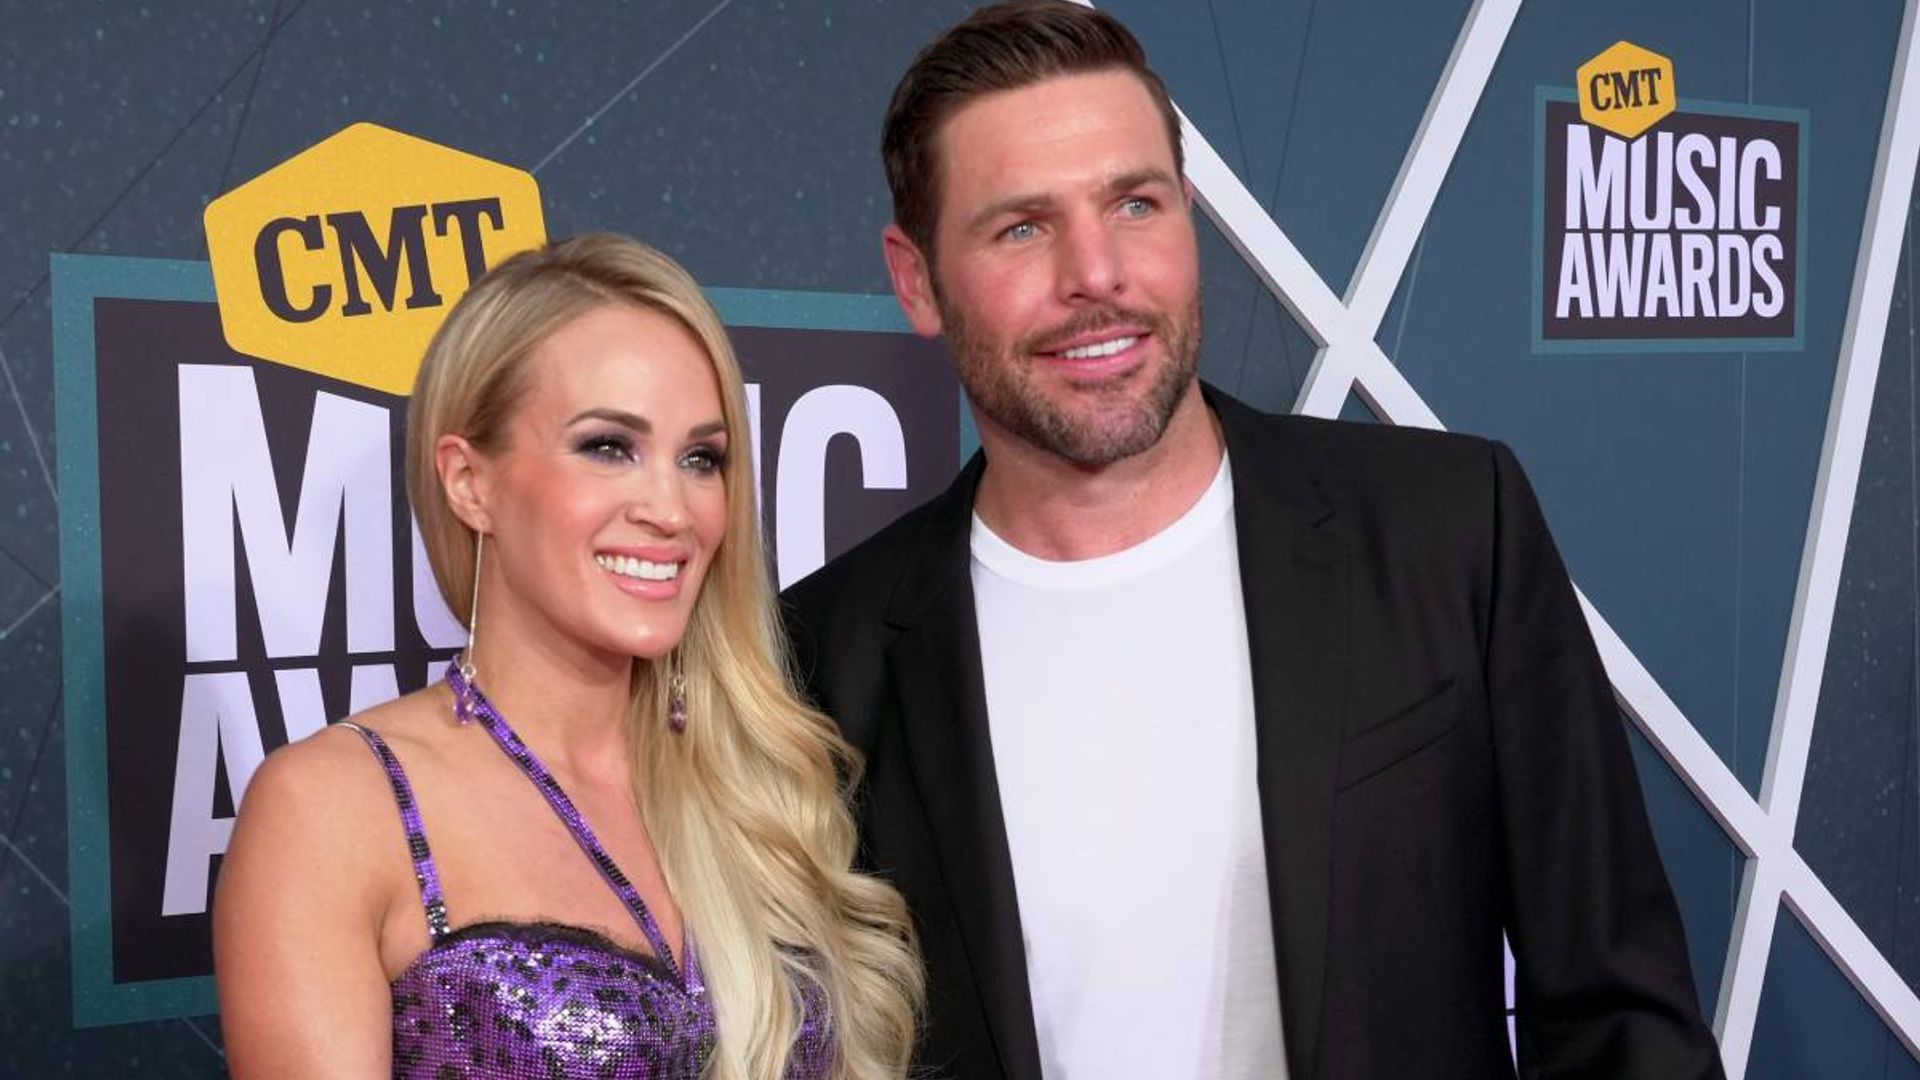 carrie underwood husband mike fisher cmt awards performance ghost story